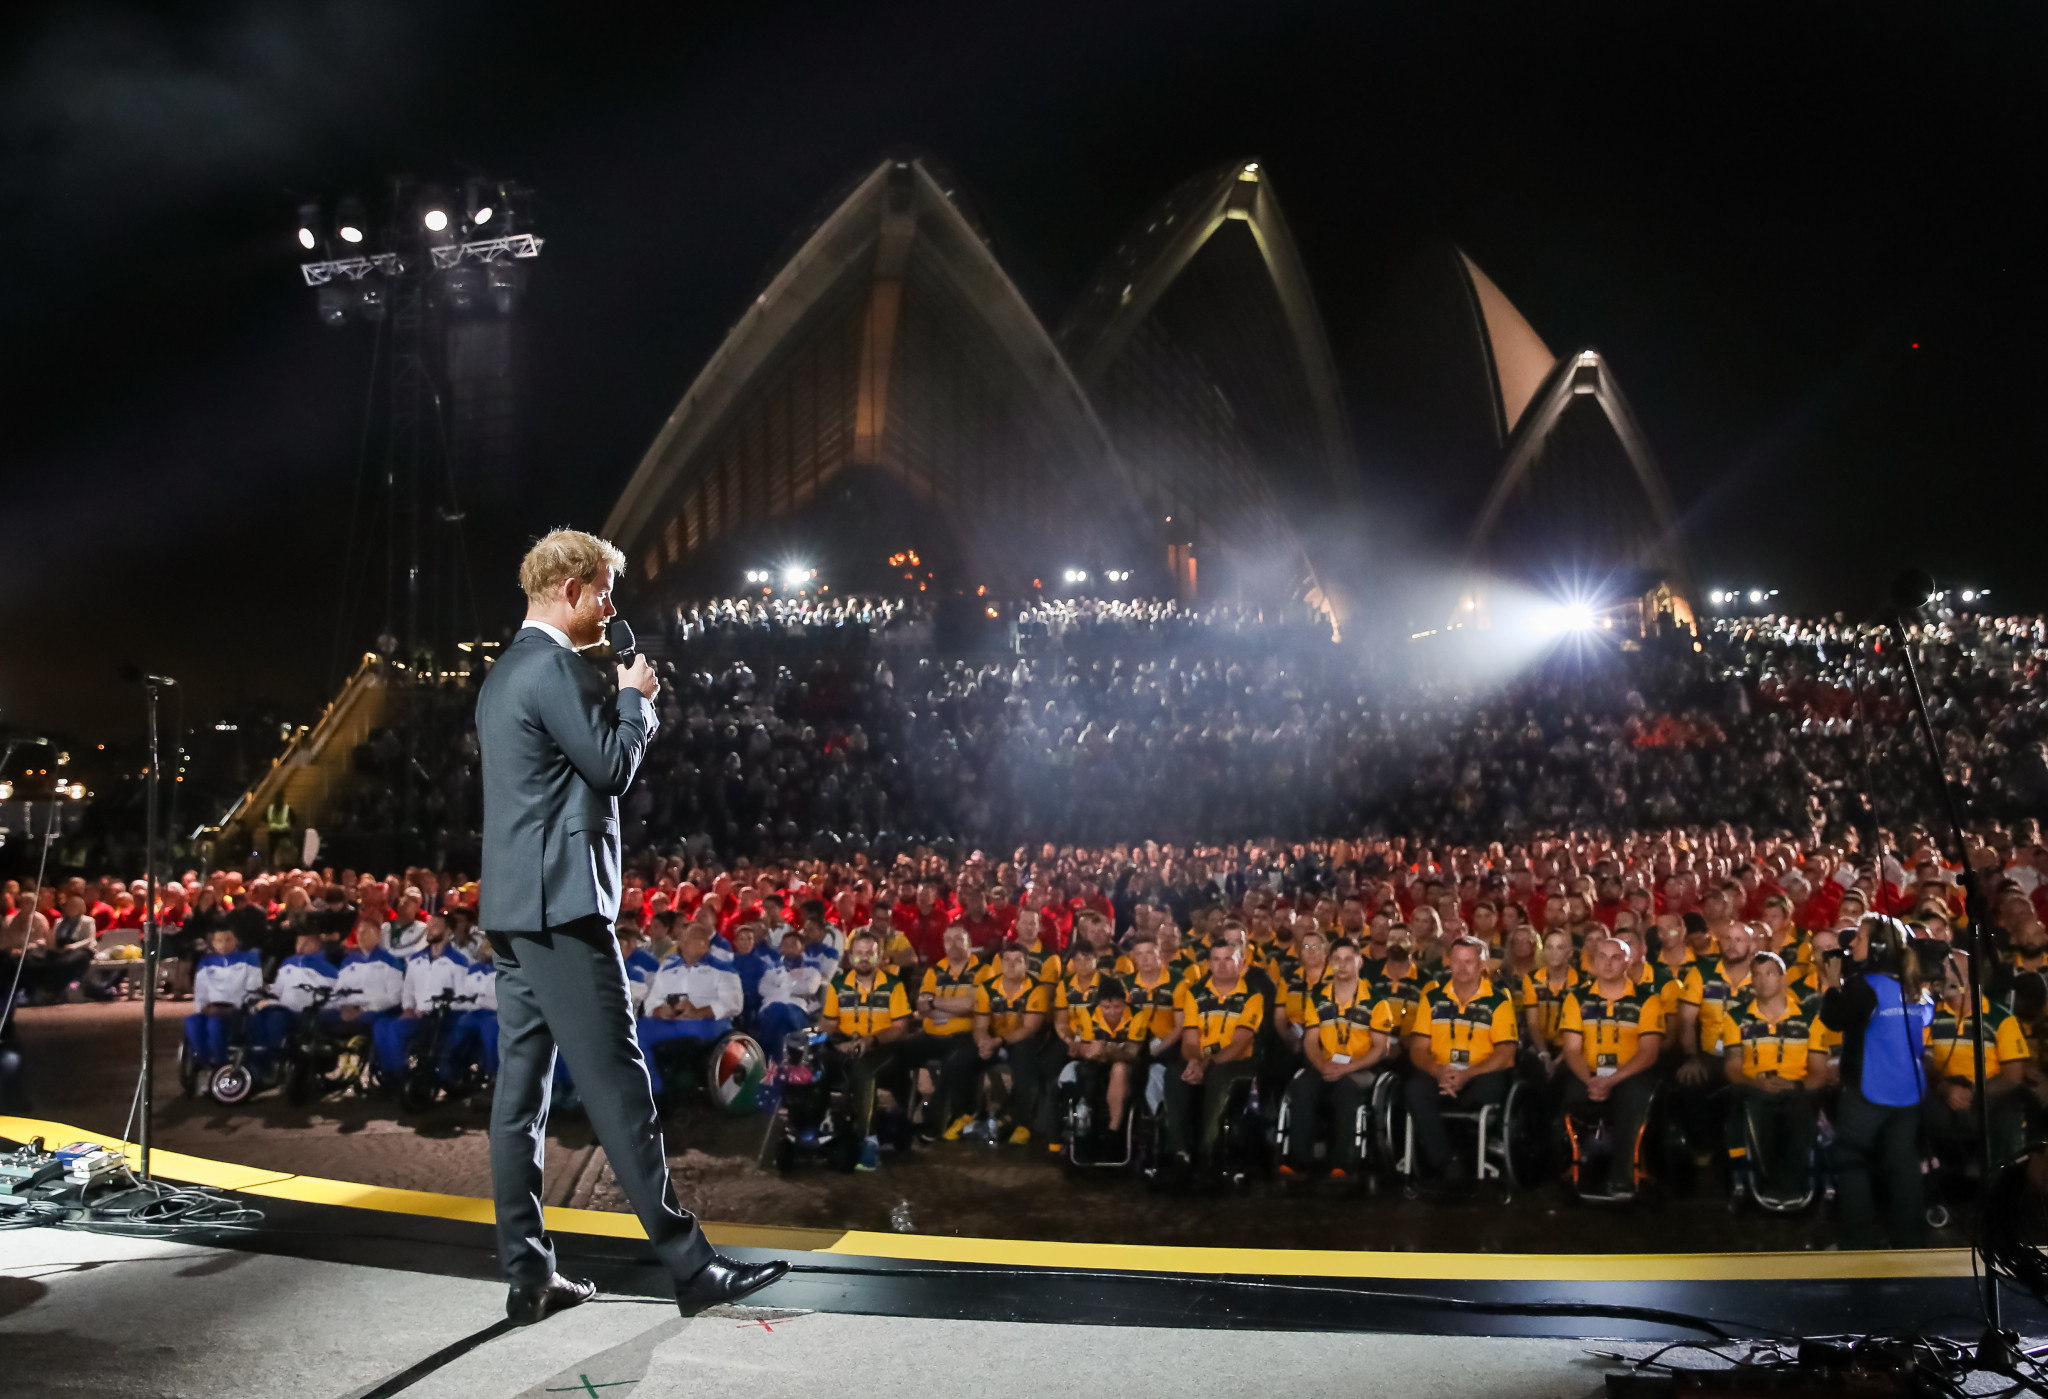 Prince Harry has opened the fourth Invictus Games during a ceremony at the Sydney Opera House that was delayed for an hour by thunderstorms ©Getty Images